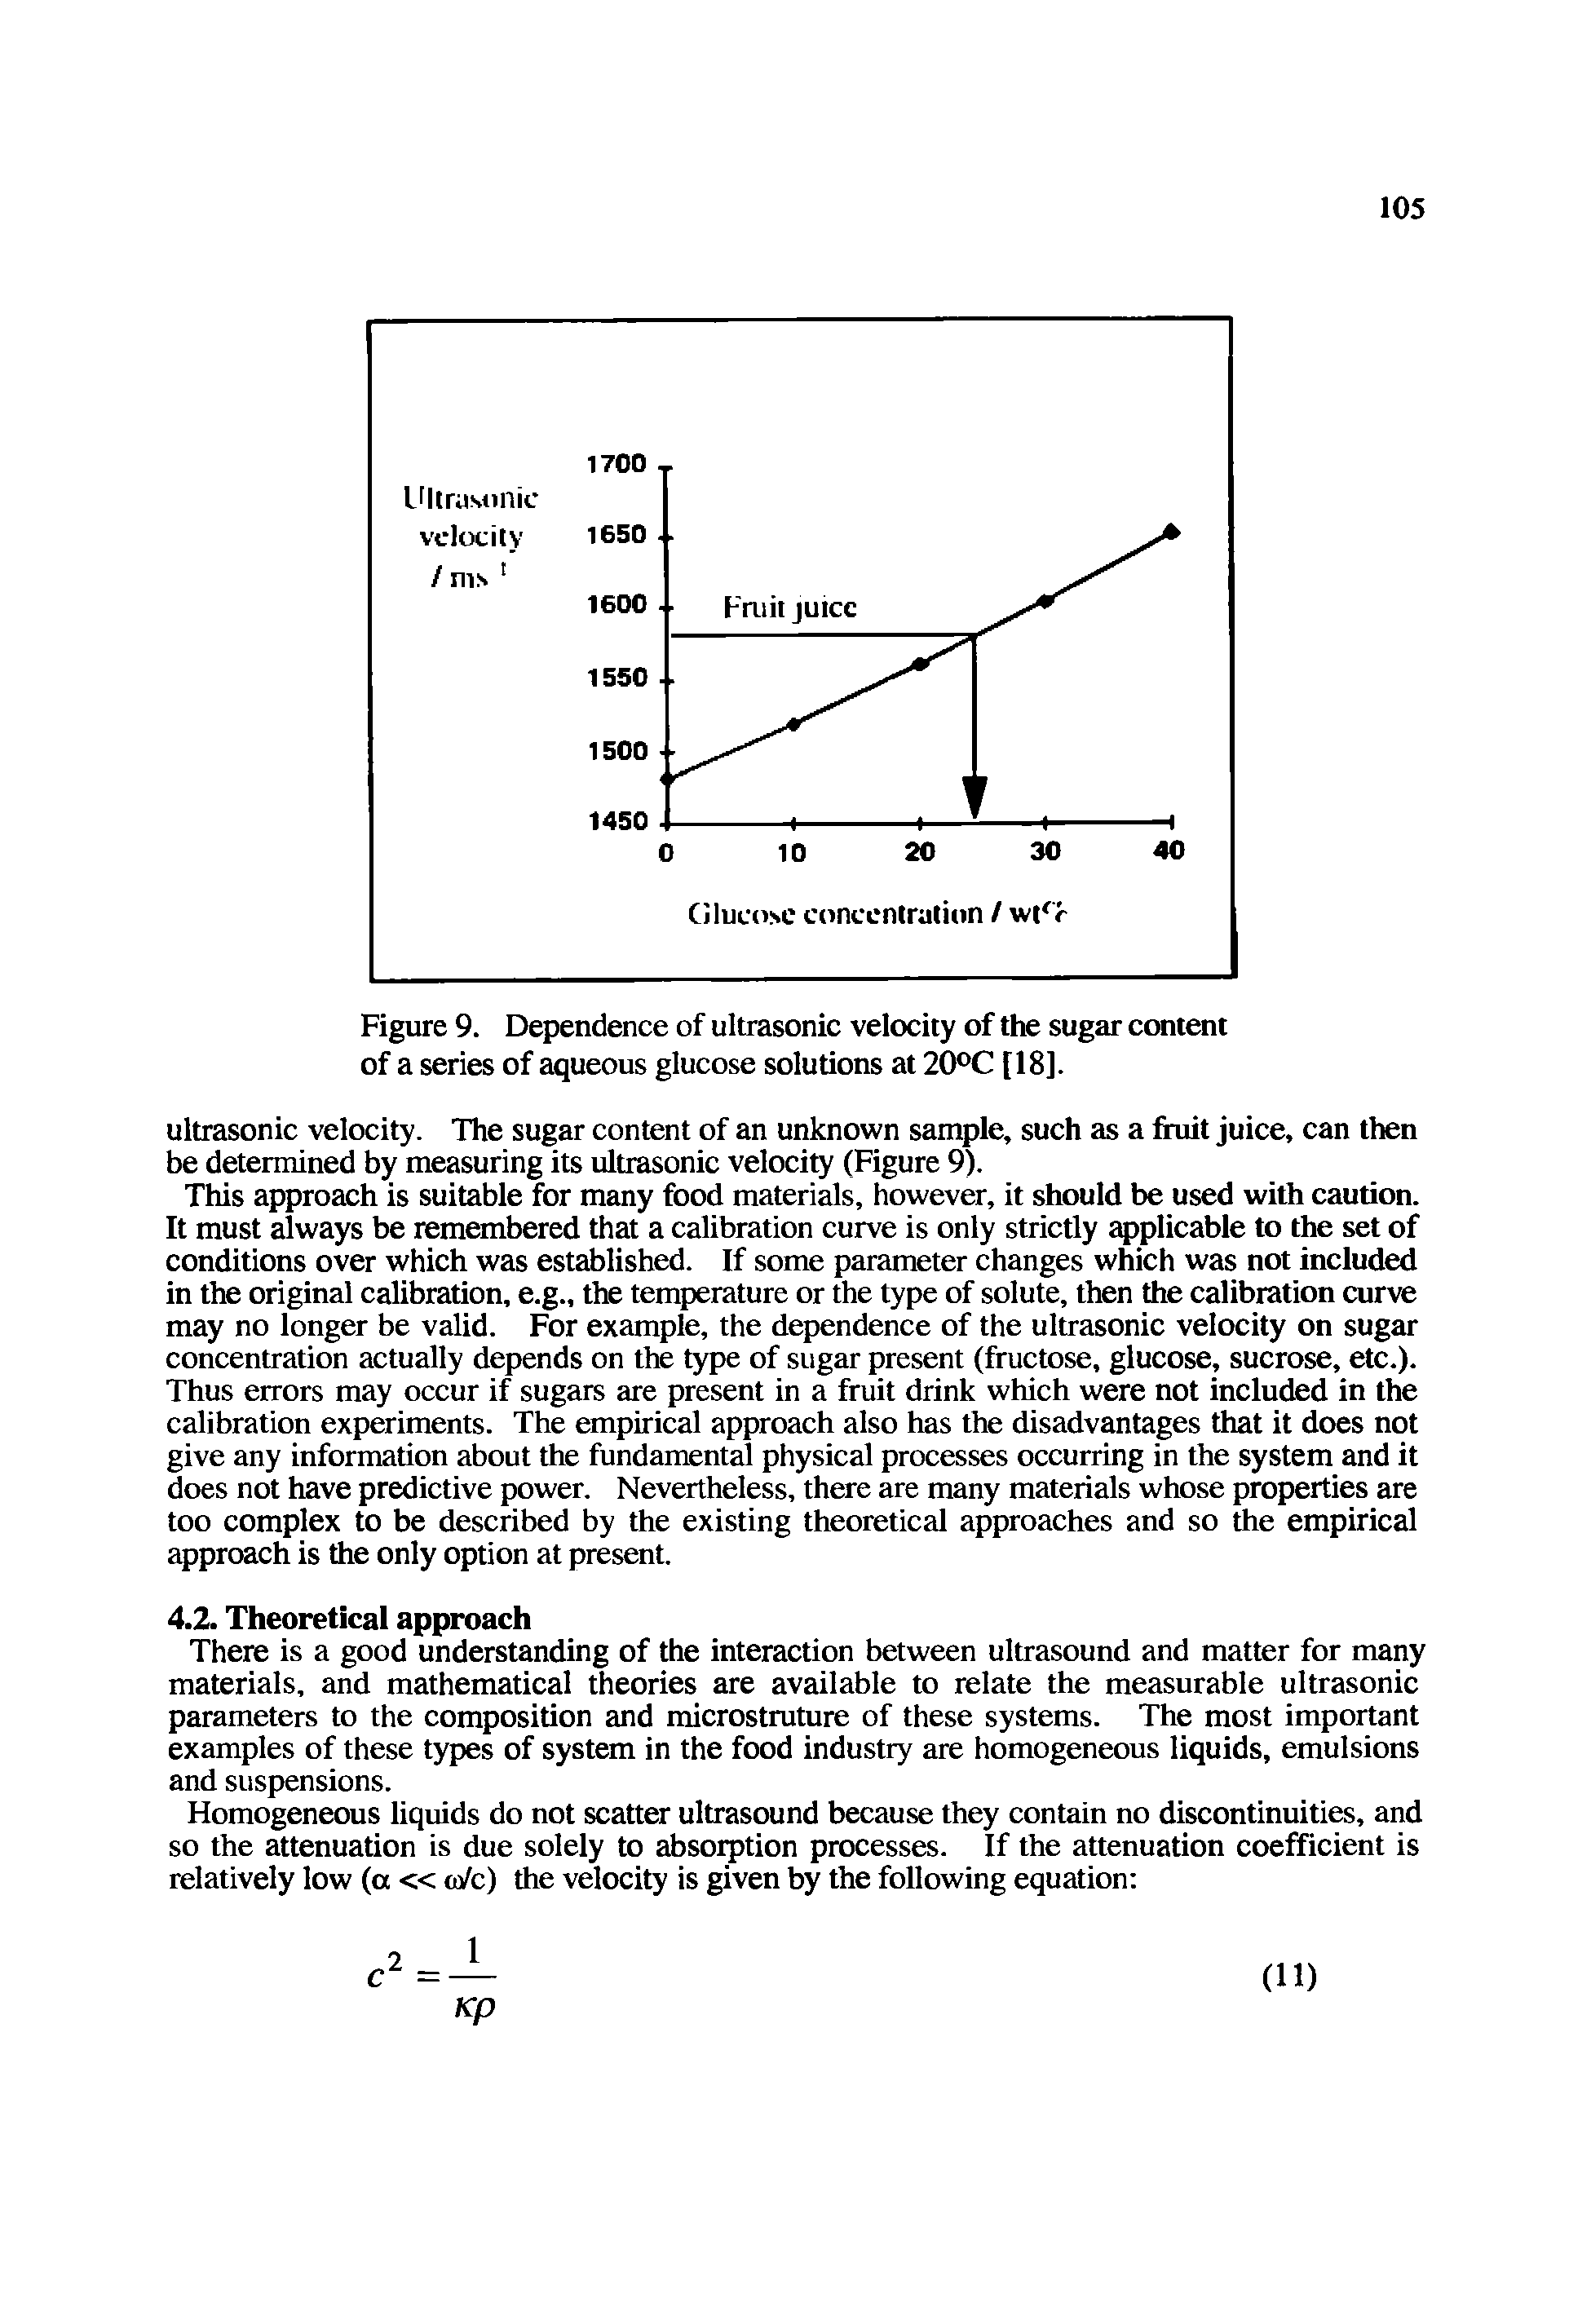 Figure 9. Dependence of ultrasonic velocity of the sugar content of a series of aqueous glucose solutions at 20°C [18].